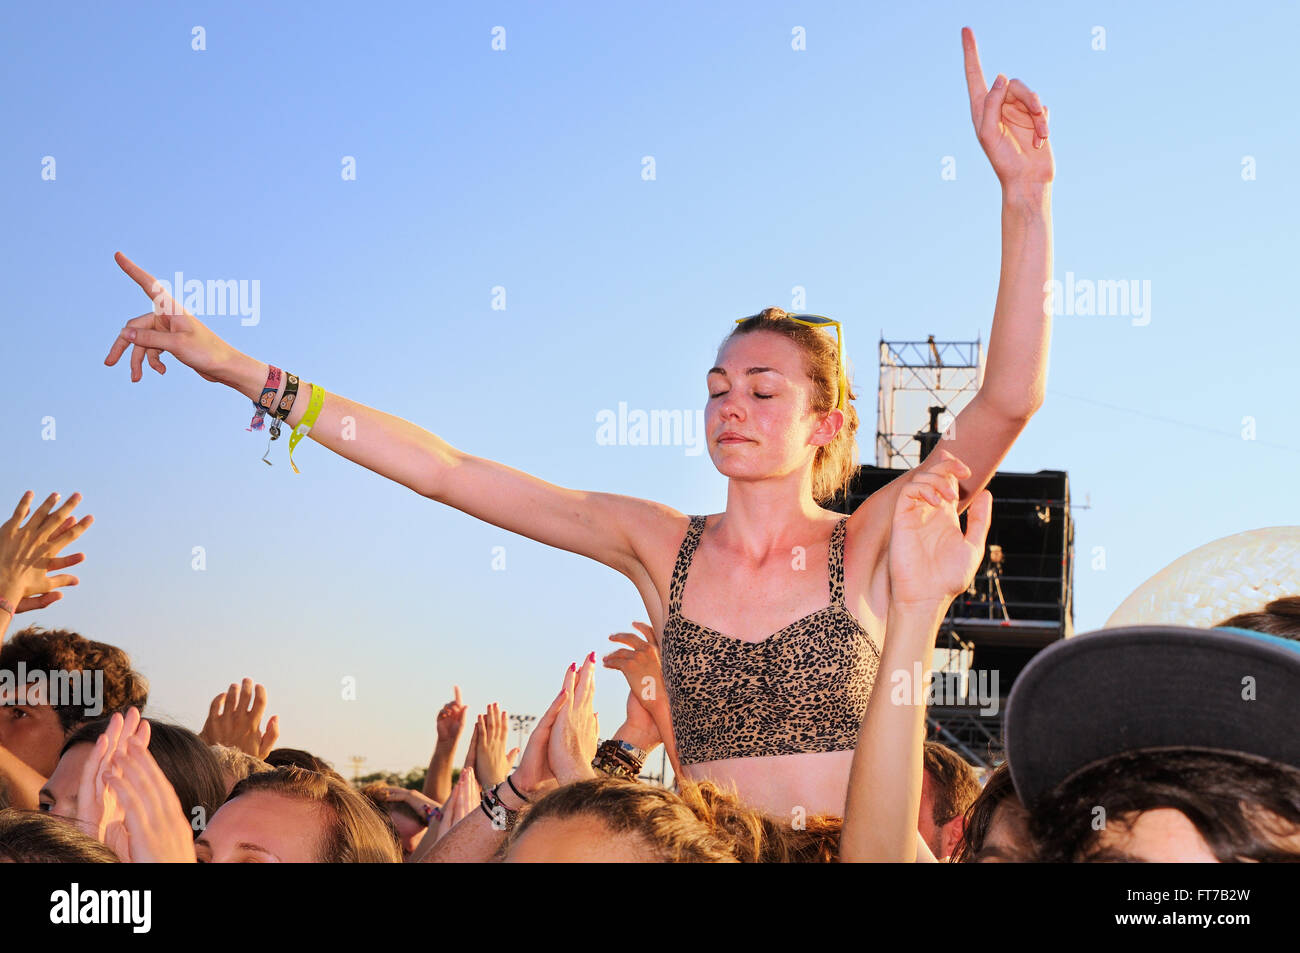 BENICASSIM, SPAIN - JULY 19: Young woman from the crowd with her arms raised in a concert at FIB. Stock Photo